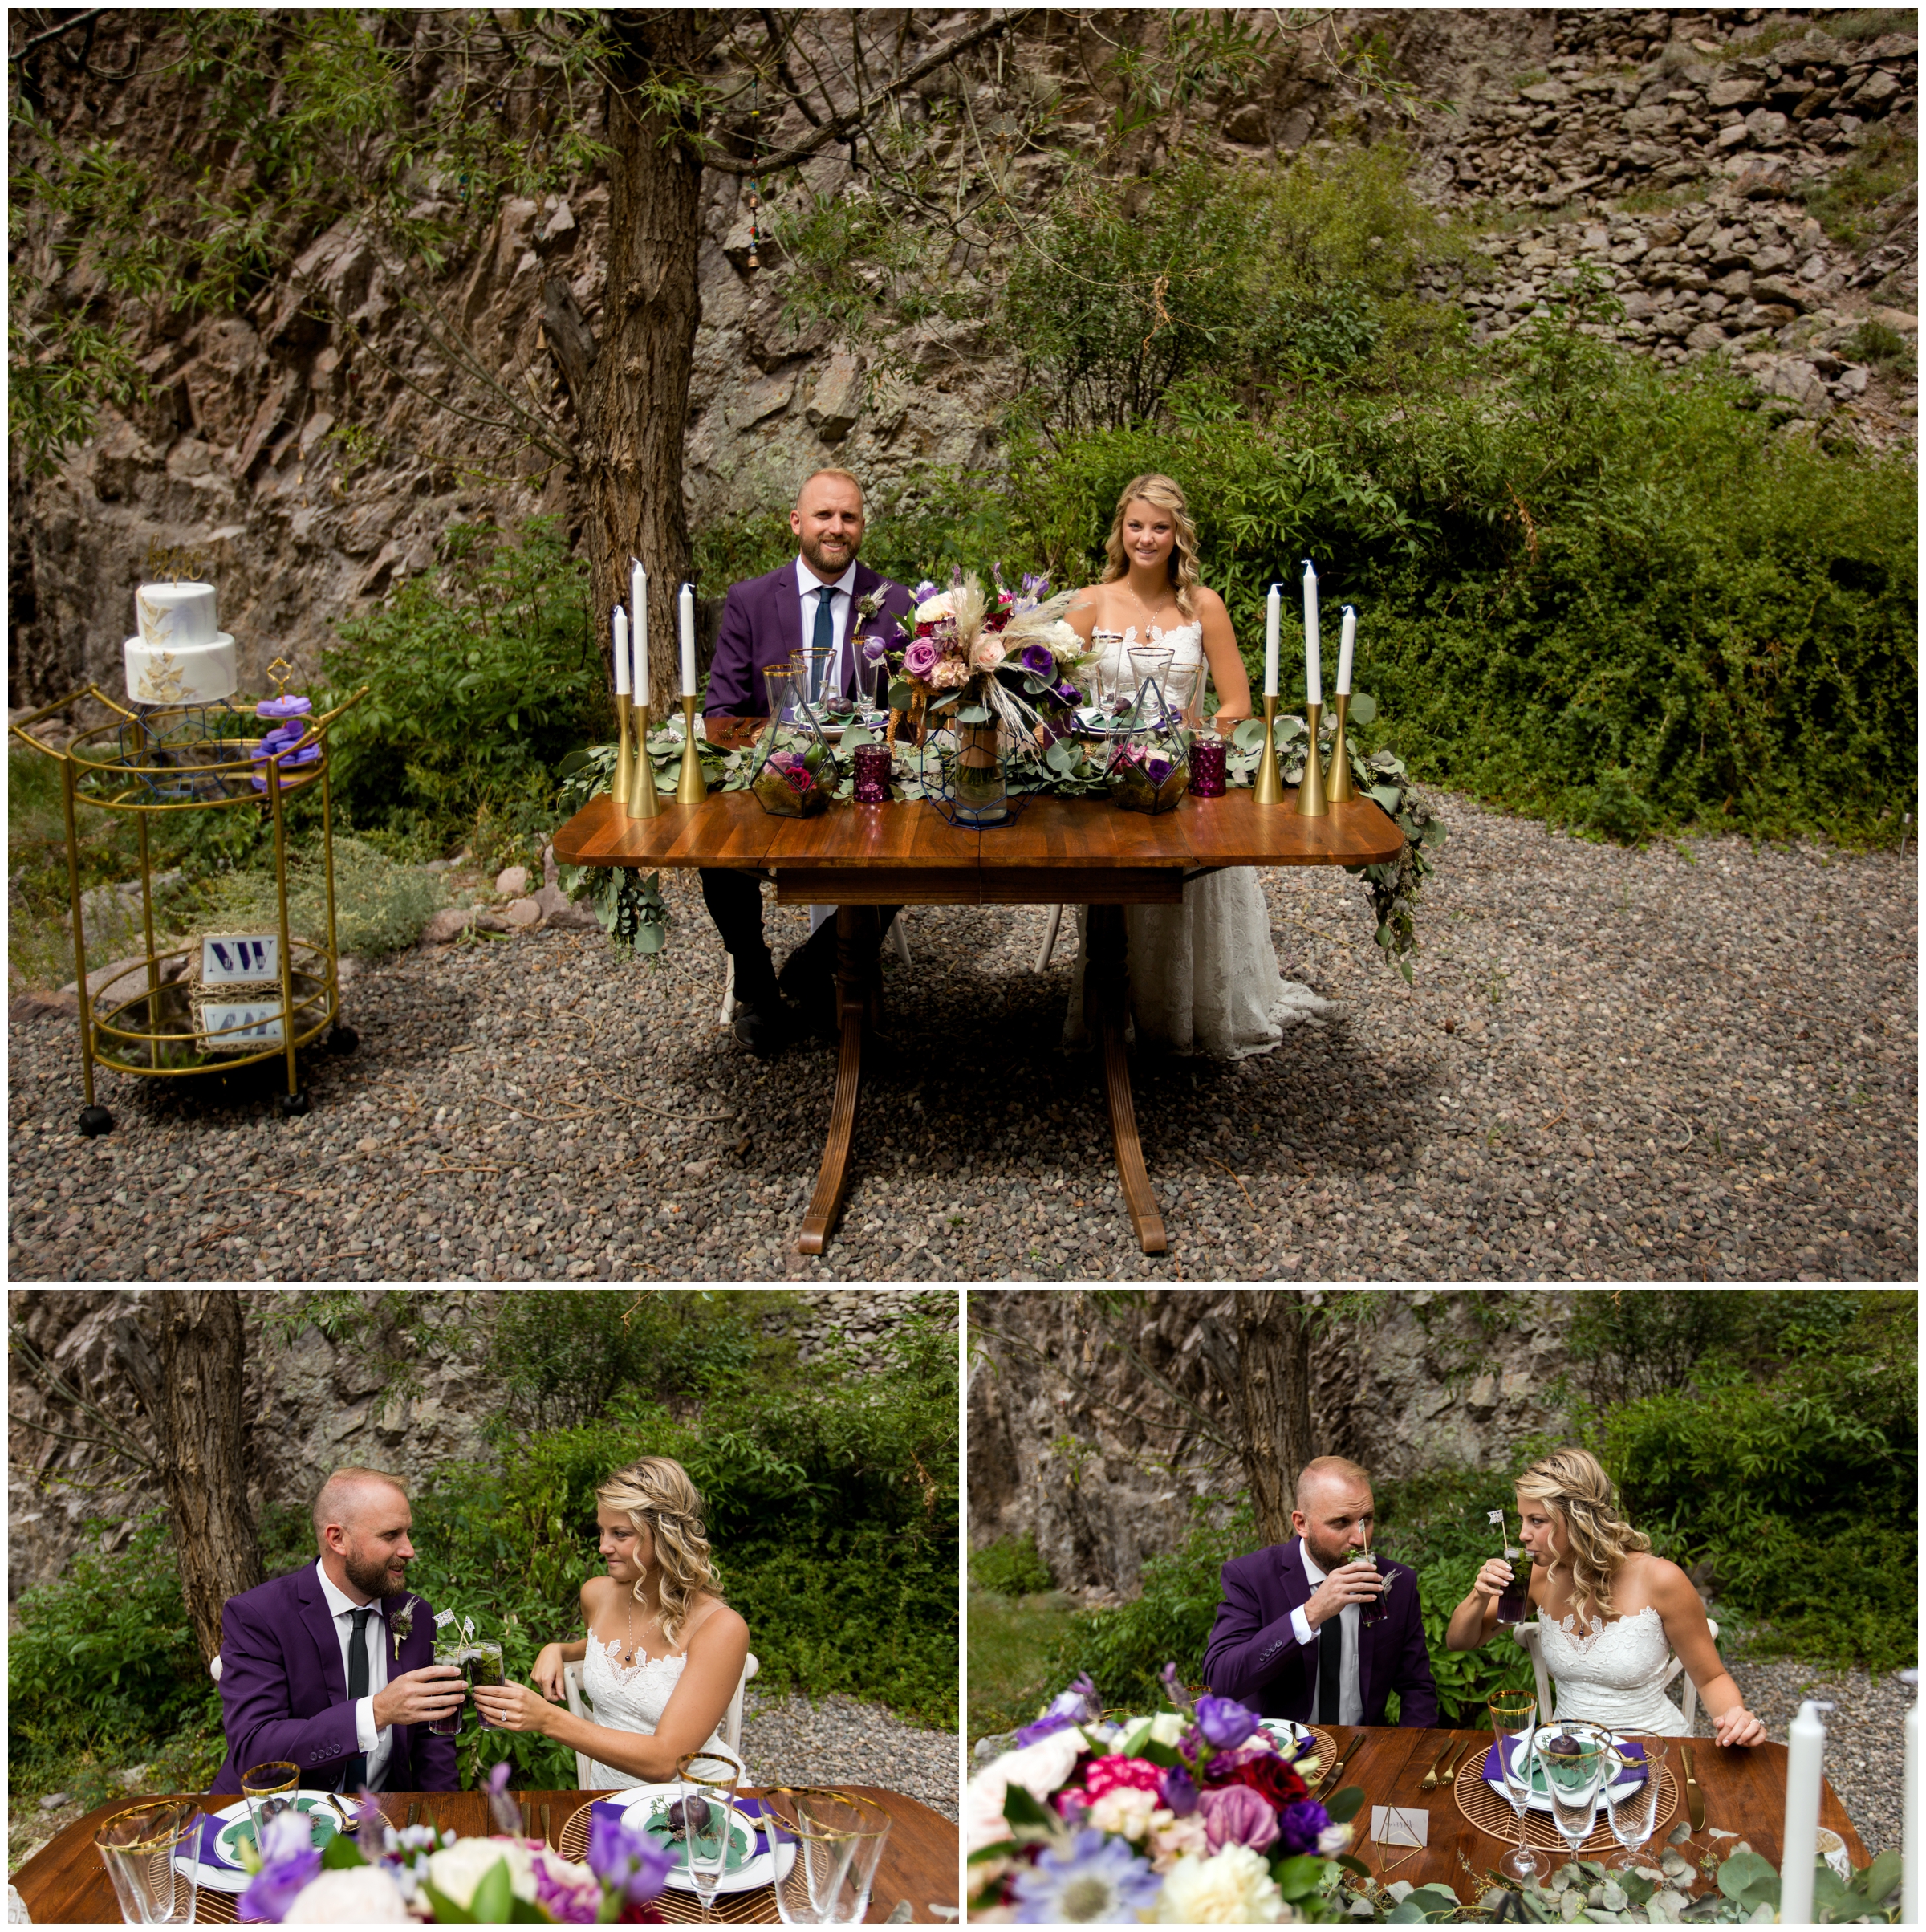 Colorado elopement reception photos by Breckenridge photographer Plum Pretty Photography. Geometric wedding inspiration with purple and gold details.